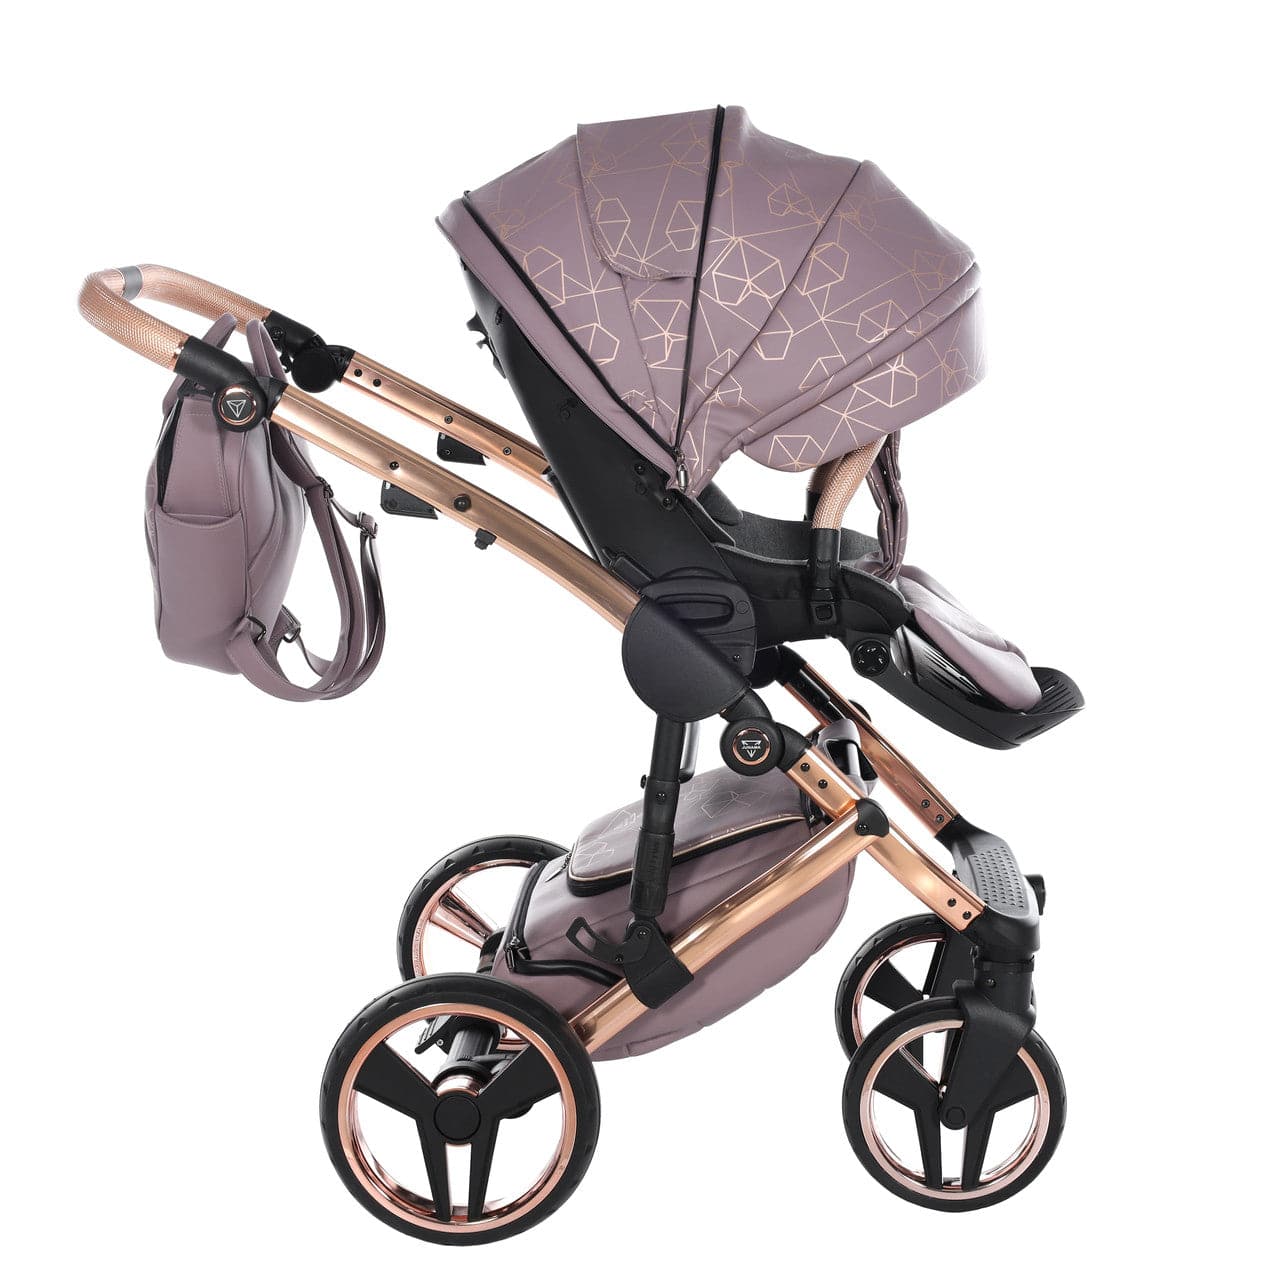 Junama Heart 2 In 1 Pram - Mauve - For Your Little One